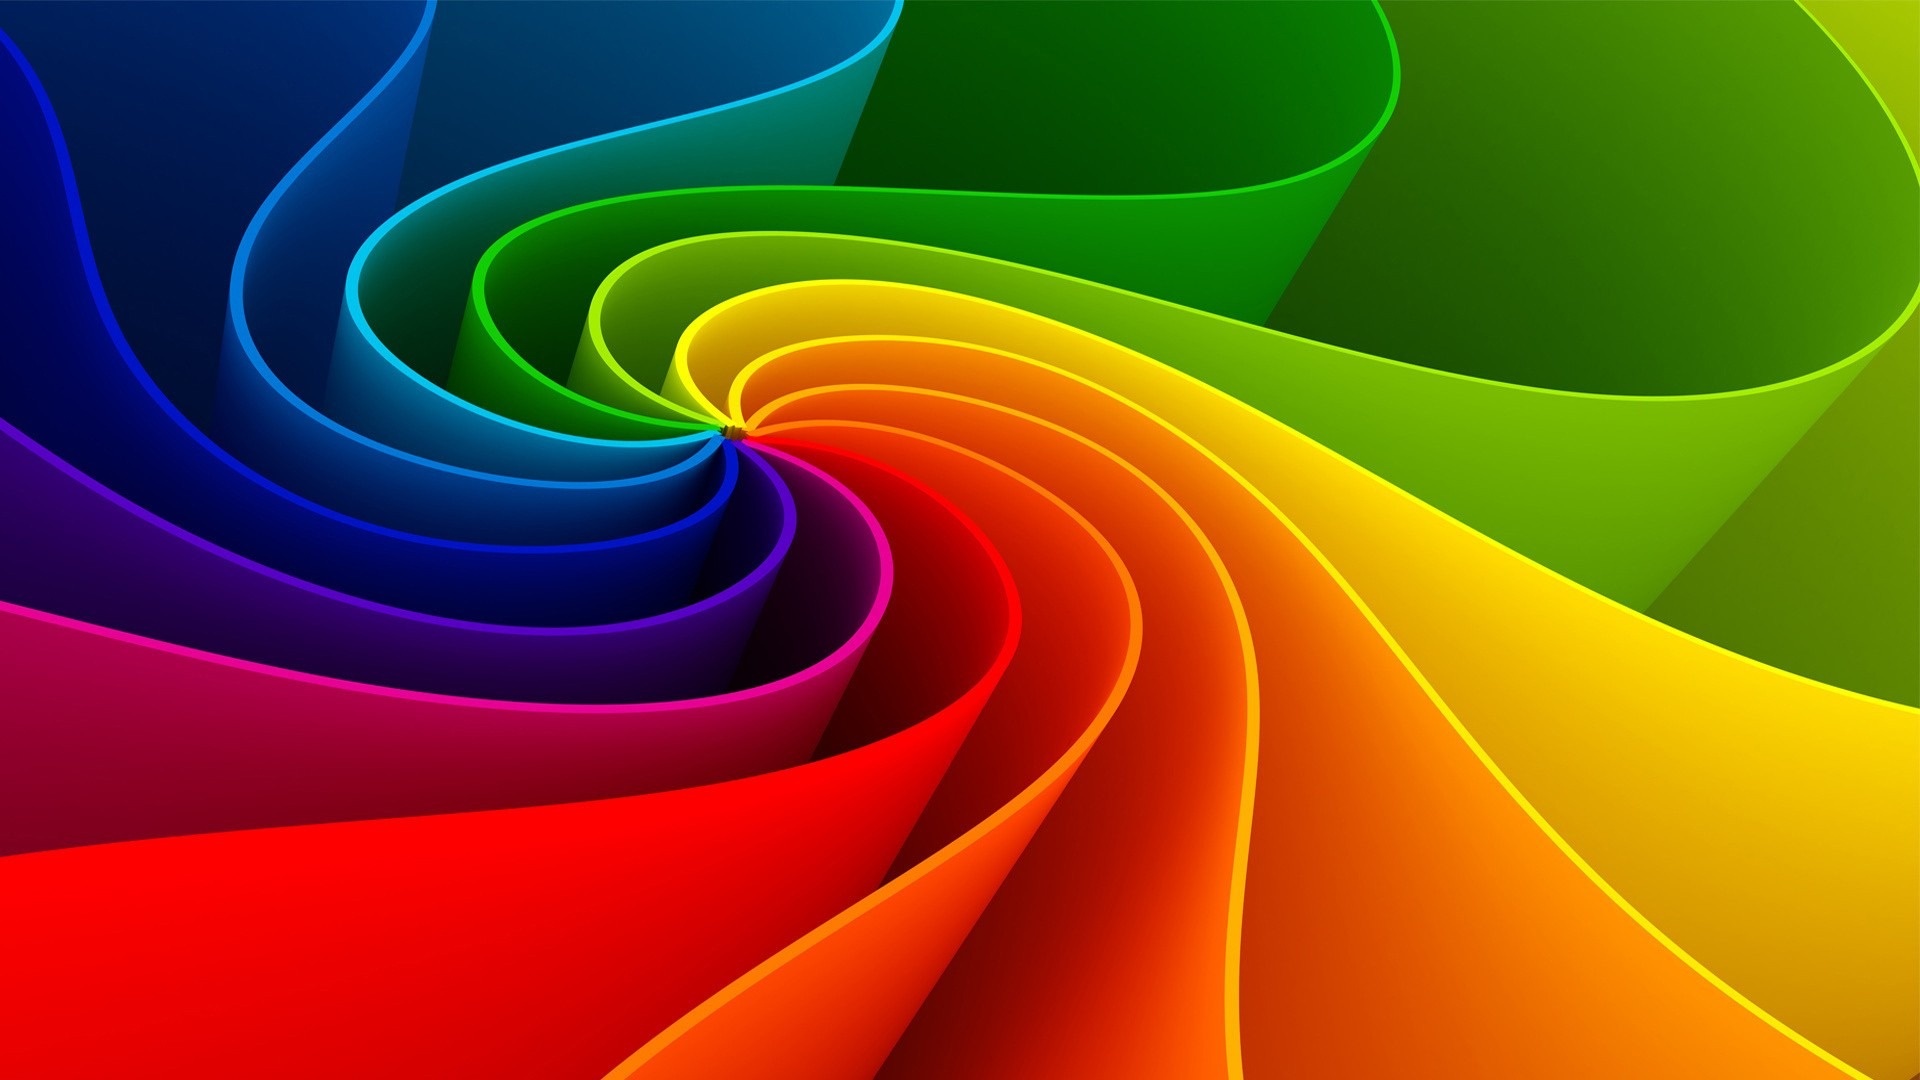  Rainbow Wallpapers HD wallpapers   Abstract Rainbow Wallpapers